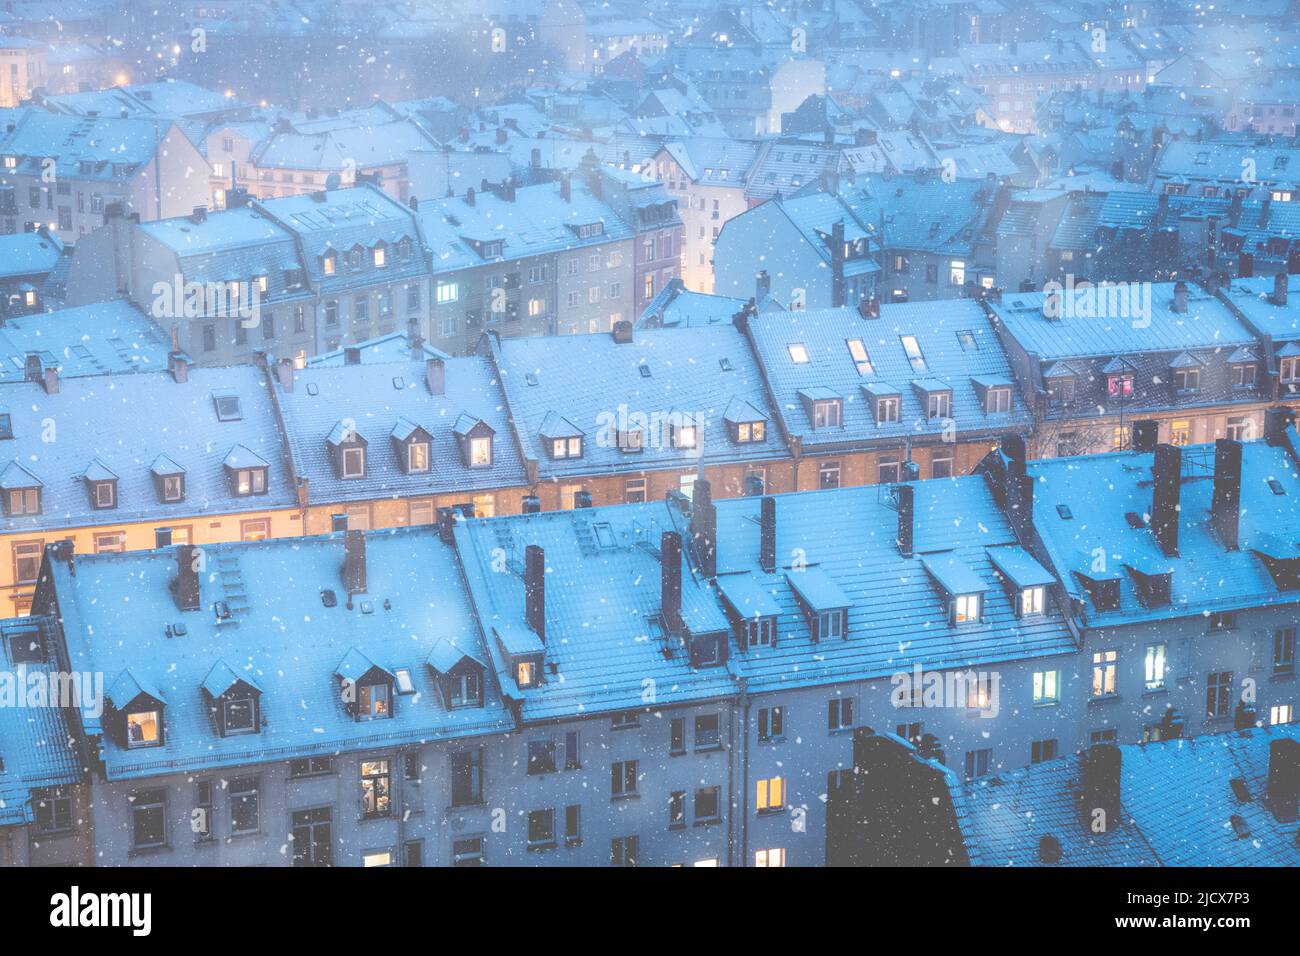 Snow falling over the traditional houses of the old town at dusk, Frankfurt am Main, Hesse, Germany Europe Stock Photo